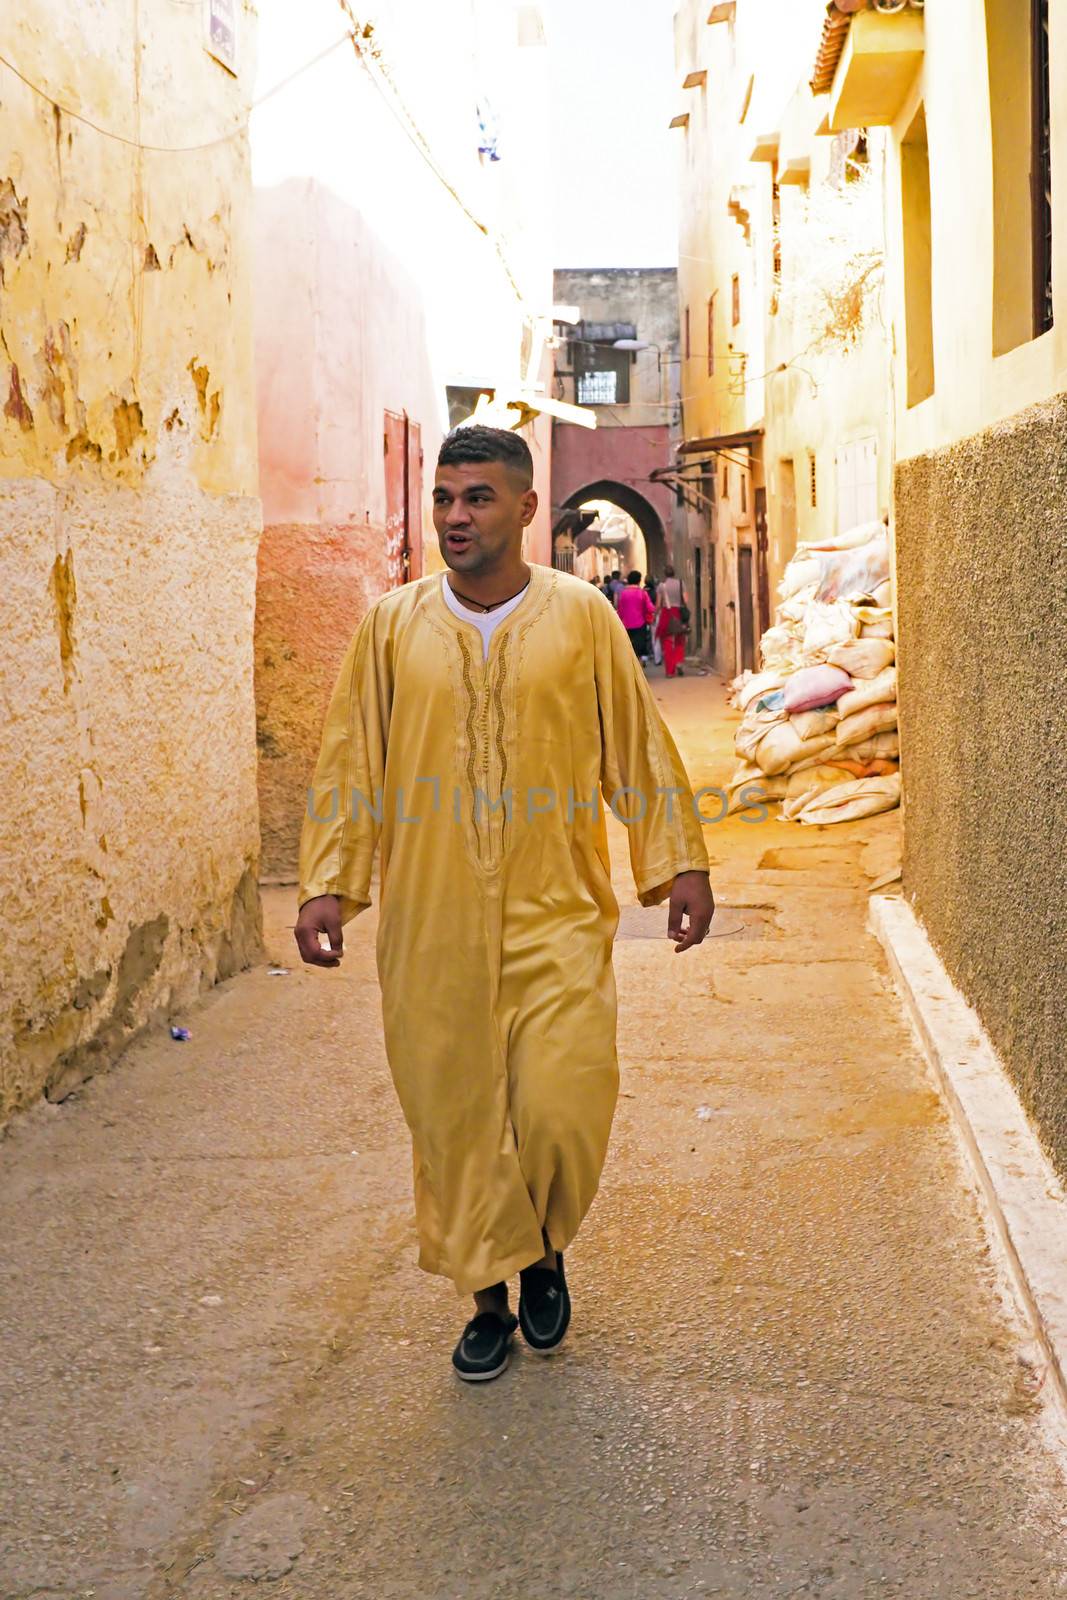 FES, MAROCCO - October 15 2013 : Man walking in the medina on Eid al-Adha. The festival is celebrated by sacrificing a lamb or other animal and distributing the meat to relatives, friends, and the poor.